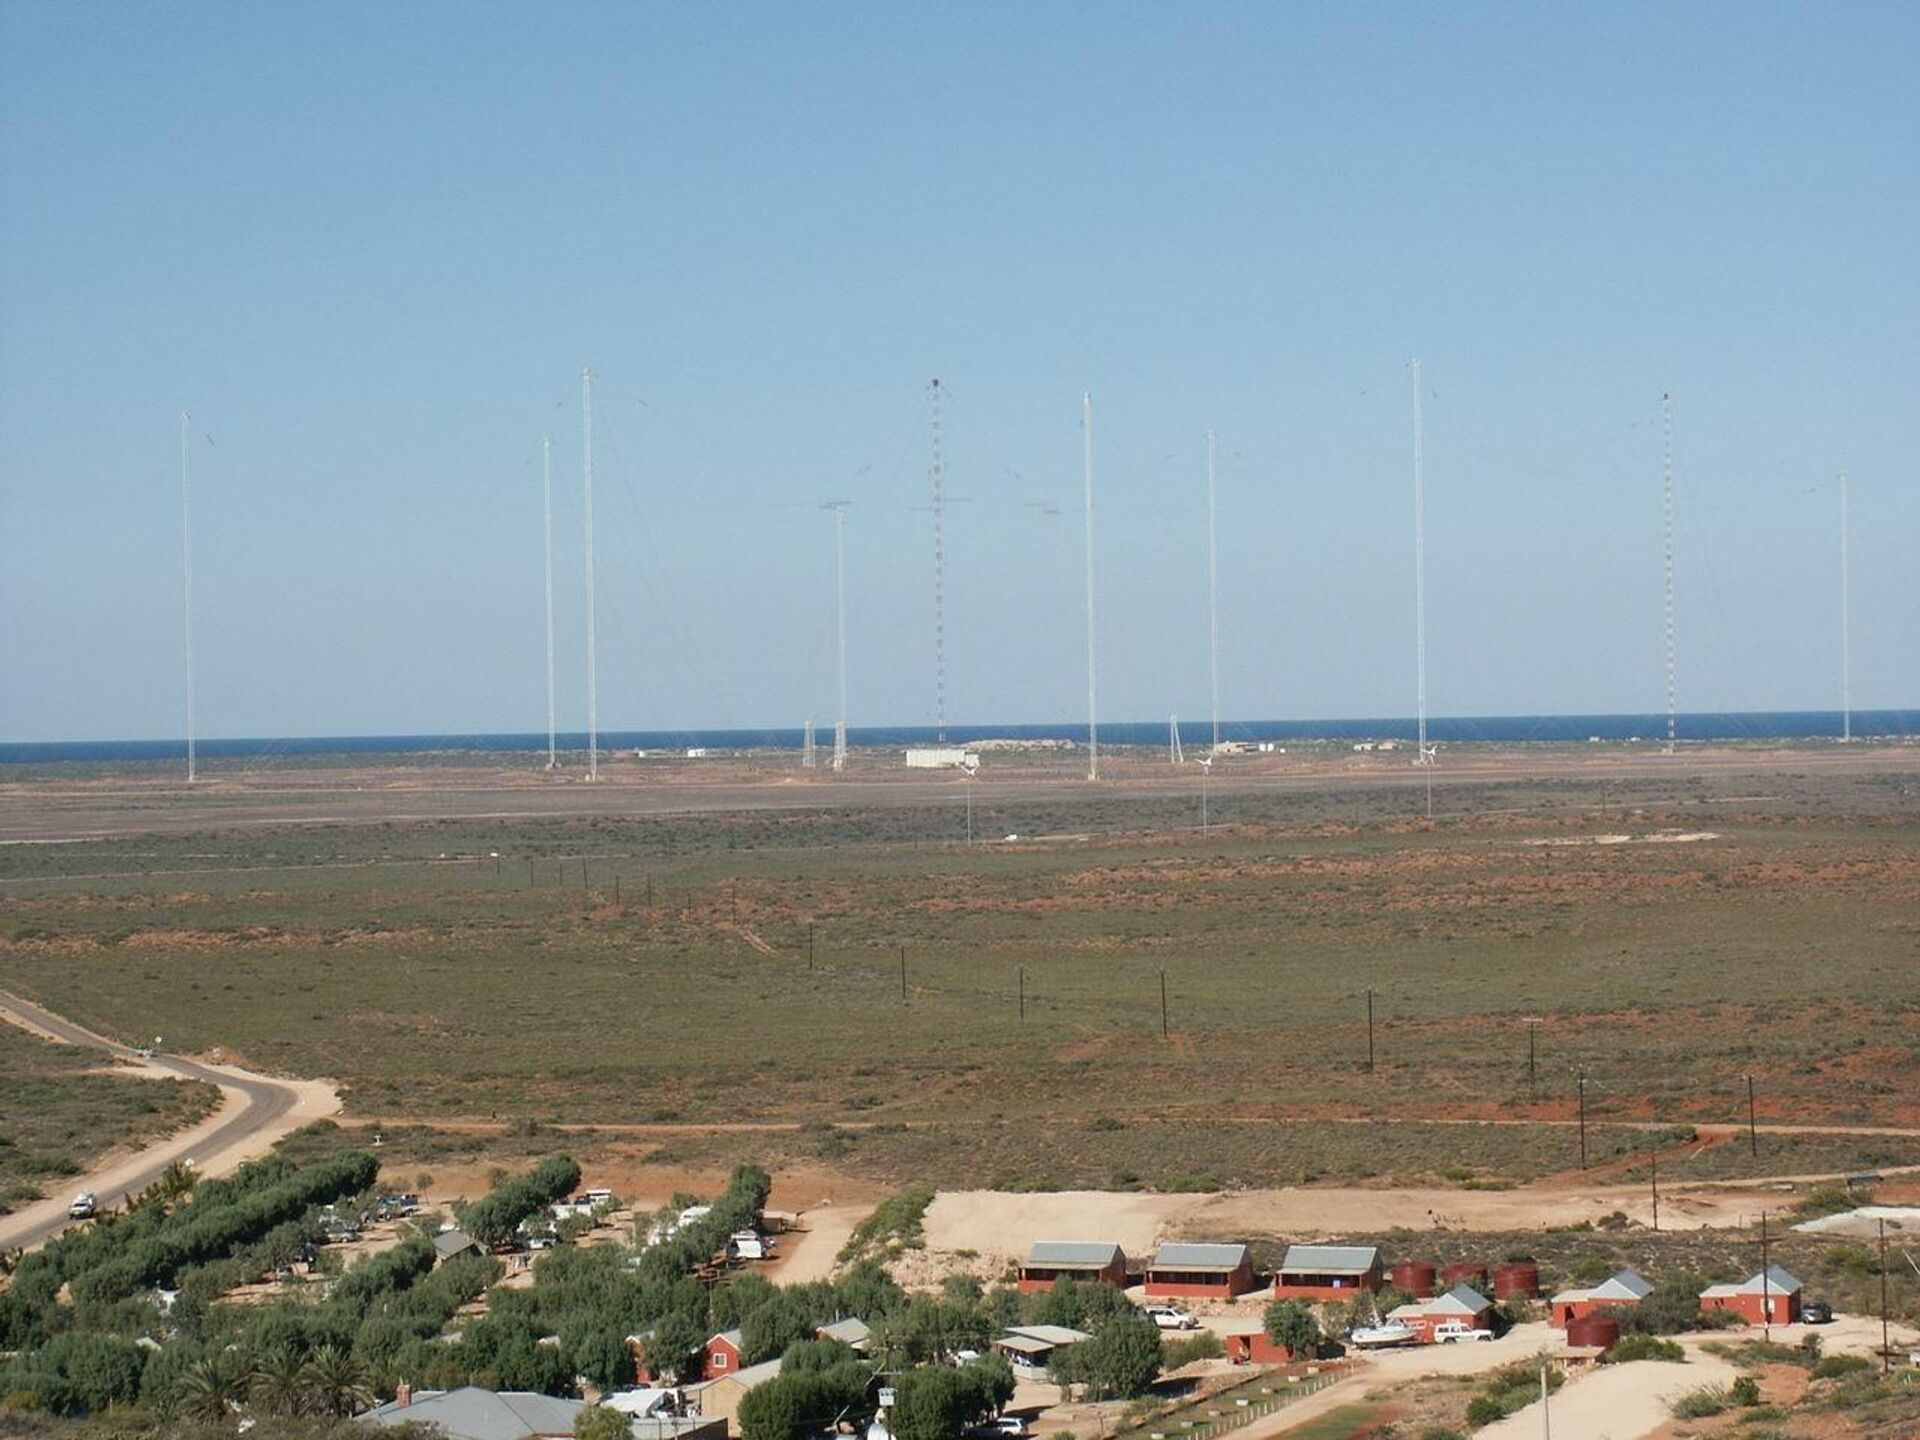 Naval Communication Station Harold E. Holt near Exmouth, Western Australia. The radio masts are part of a large wire antenna which is used to transmit very low frequency (VLF) radio waves to communicate with submerged submarines. This type of antenna is known as a Goliath, a type of umbrella antenna, but has been heavily modified. It consists of a ring of steel masts which support a network of horizontal cables radiating from the central mast. The central mast acts as the radiating element, while the horizontal cables serve as a capacitive top-load, creating a large capacitor with the ground. This serves to increase the current in the central radiator, increasing the radiated power. - Sputnik International, 1920, 16.05.2022